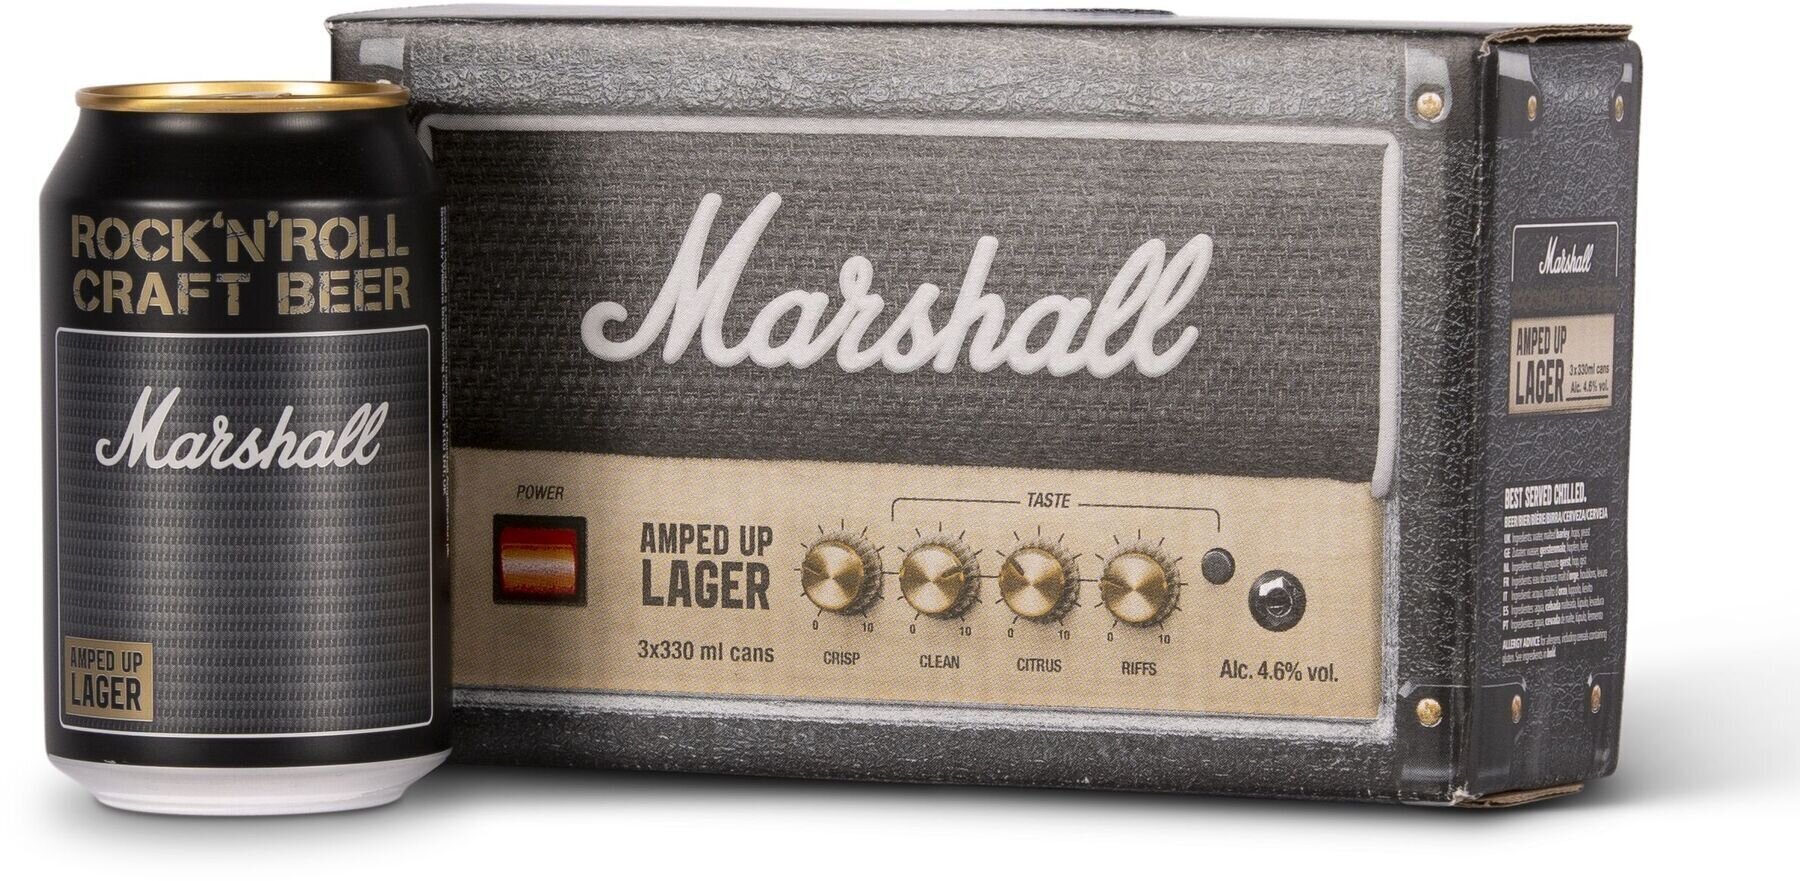 Beer Marshall Amped Up Lager Can Beer